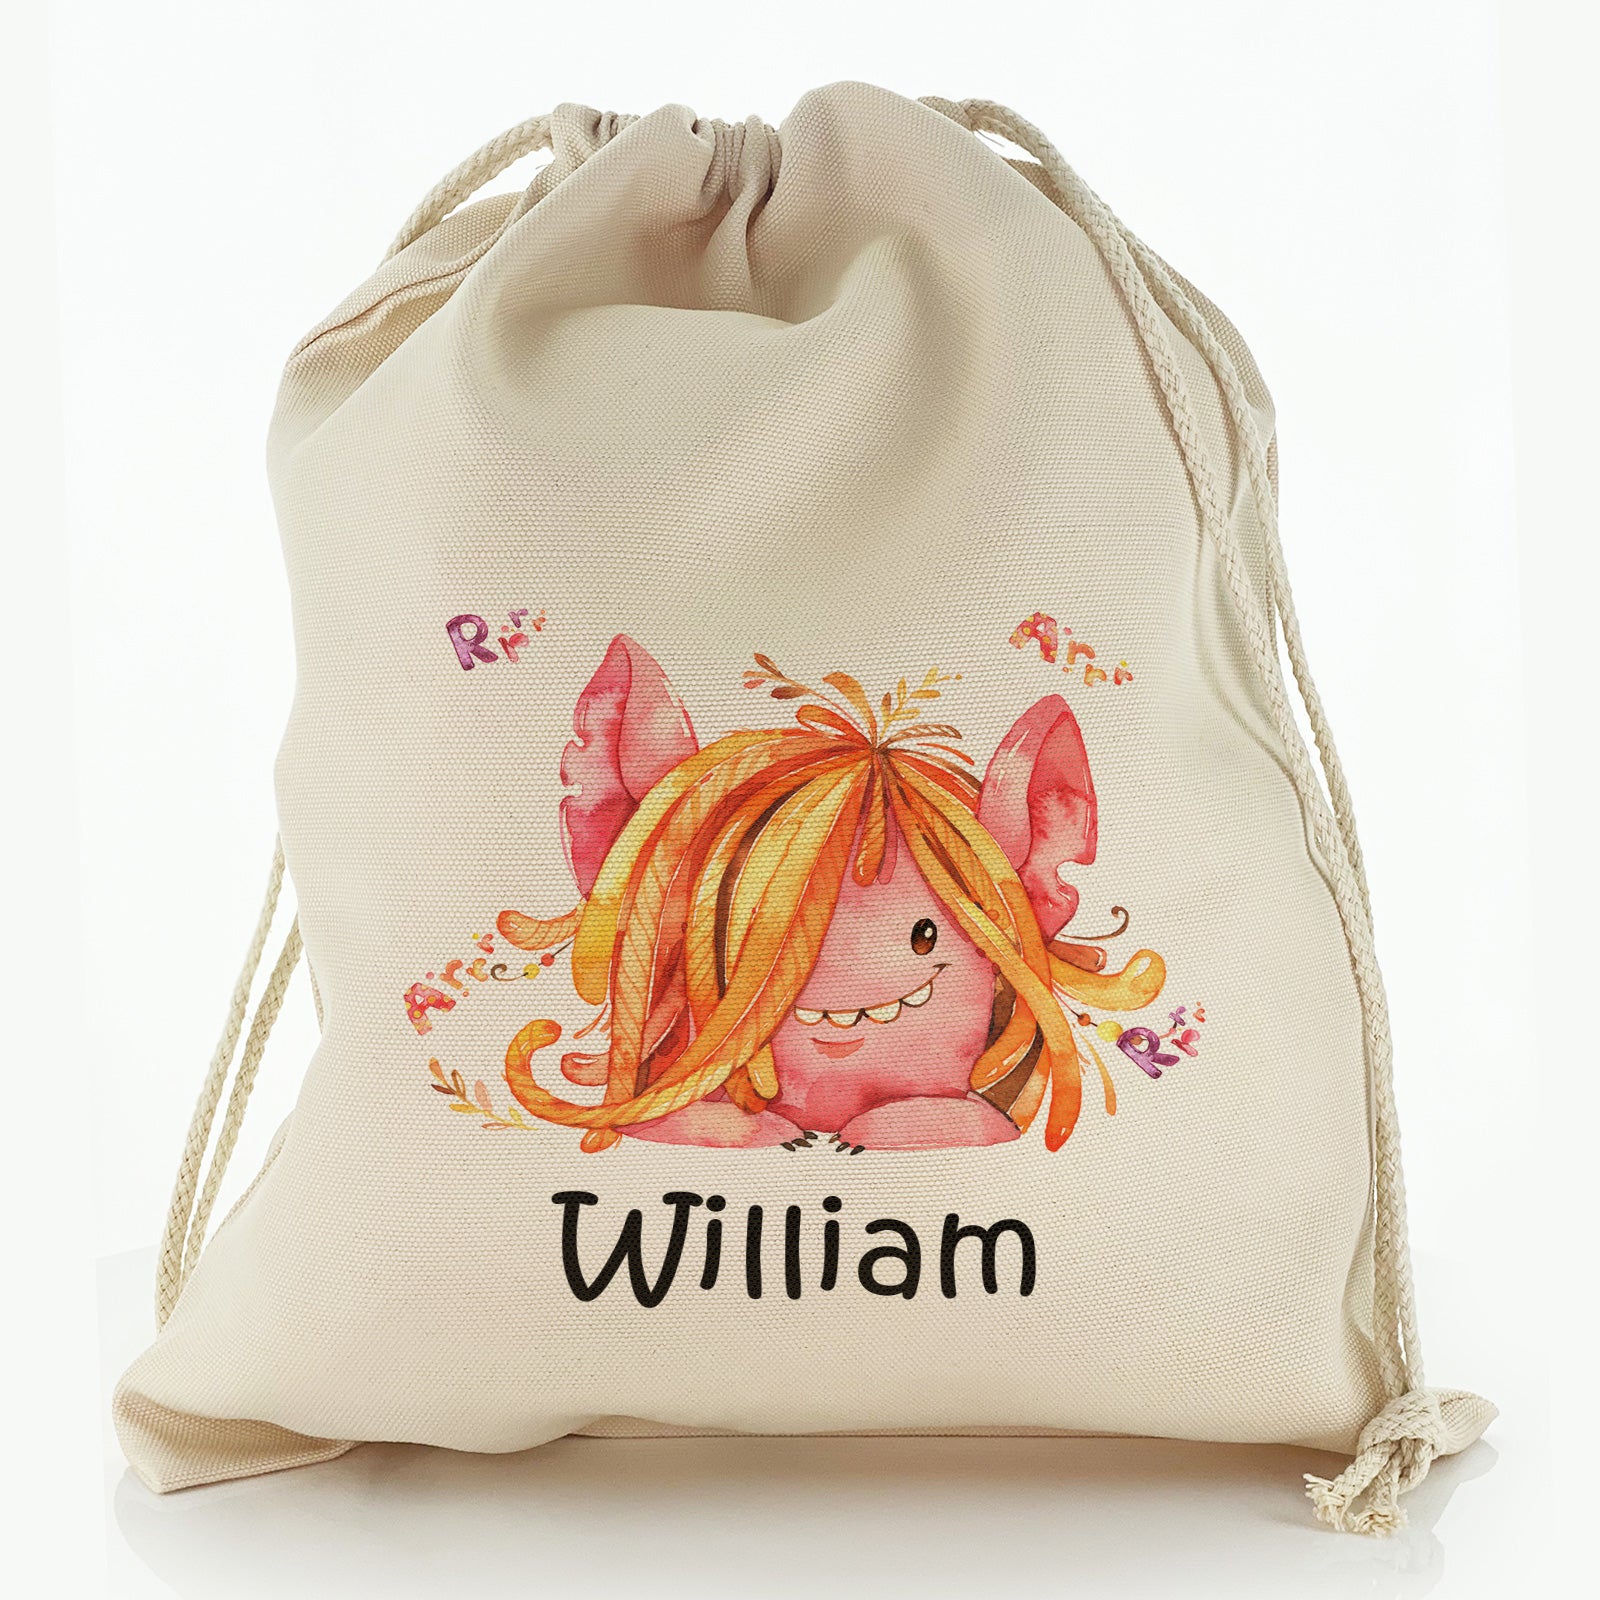 Personalised Canvas Sack with Childish Text and Hairy Growling Red Monster